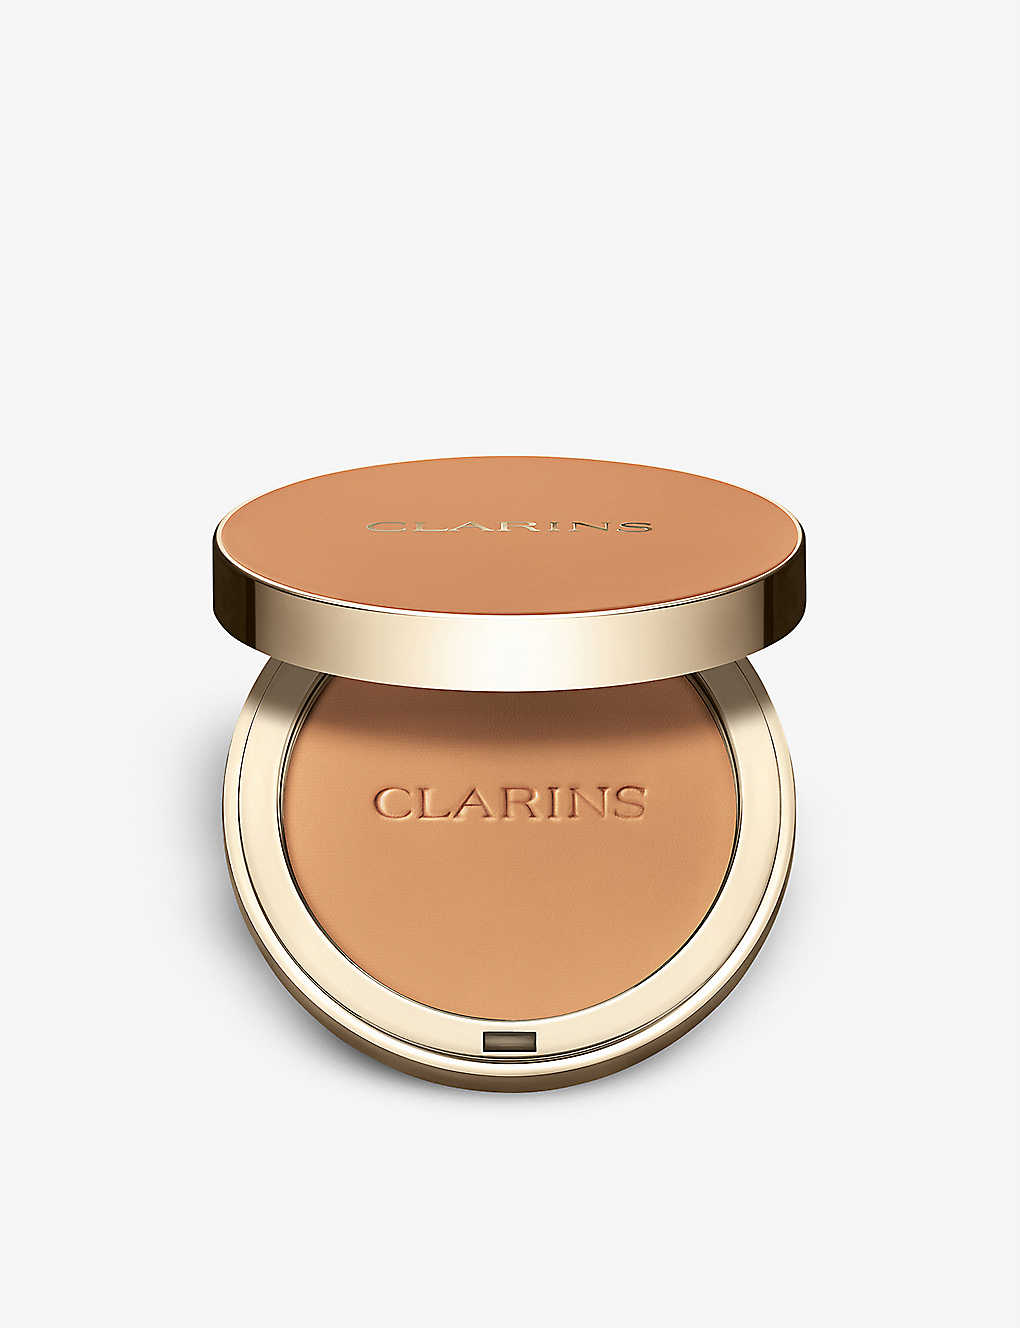 Clarins Ever Matte Compact Powder 10g In 5